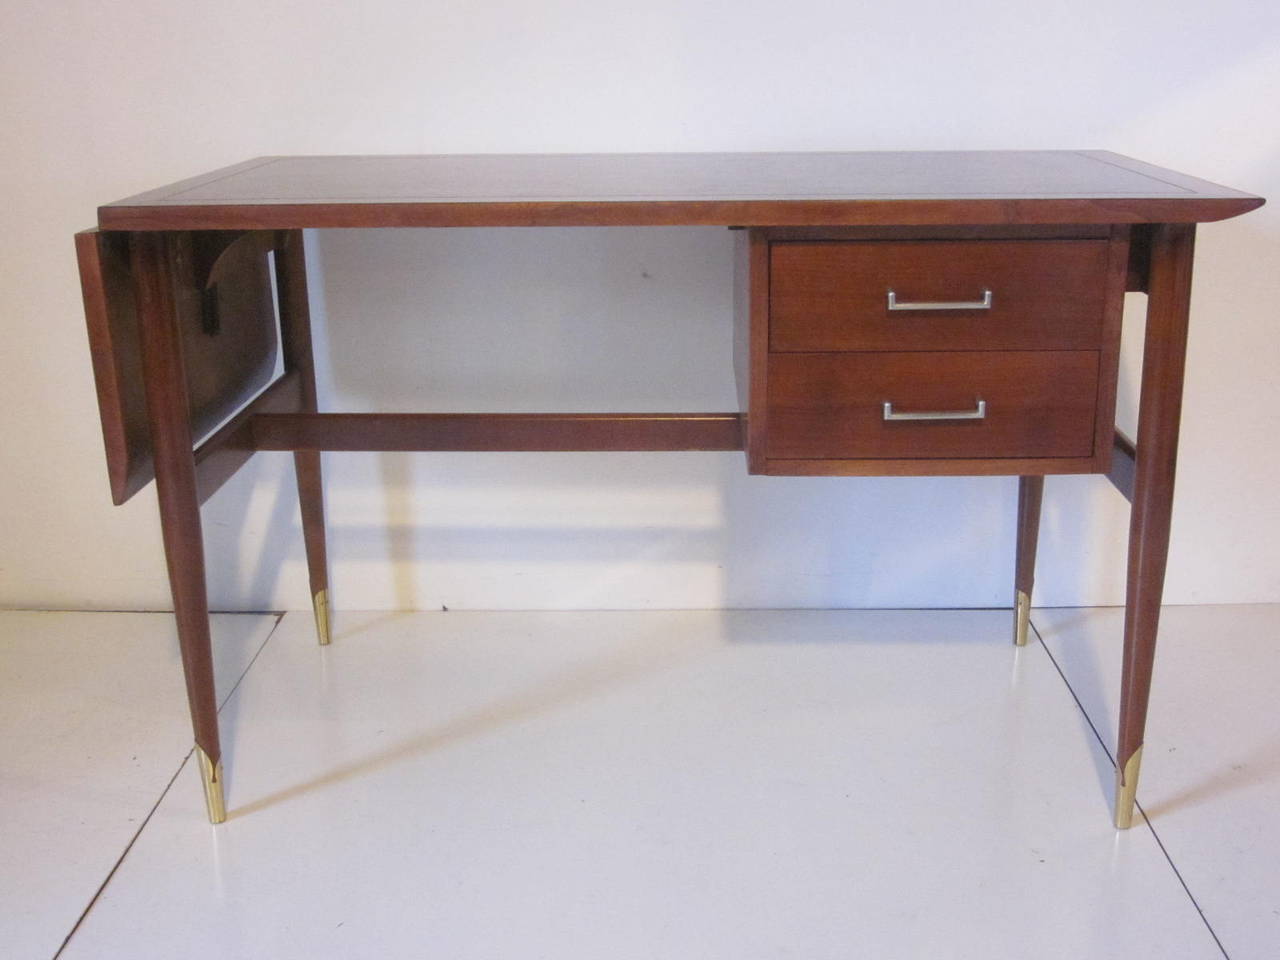 A dark walnut Altavista desk with drop leave extension to one side, two floating drawers under the top with metal pulls and brass end caps to the conical legs. With the drop leave up the total length is 60